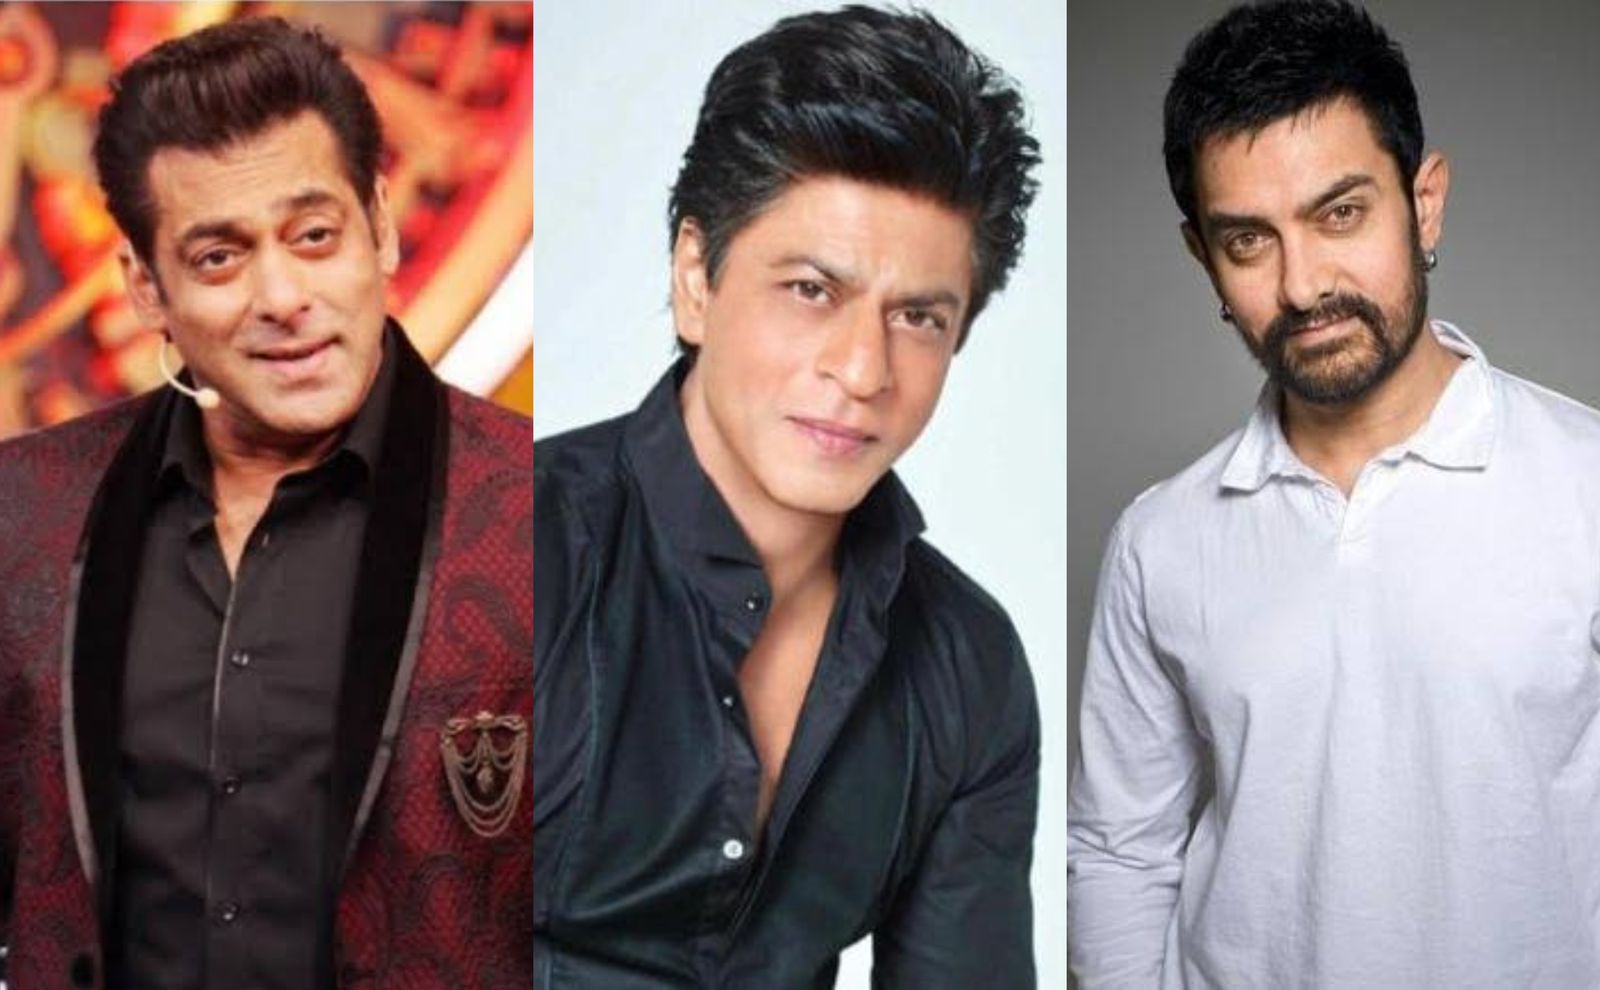 Salman Khan Answers What Will It Take To Bring Him, Shah Rukh Khan And Aamir Khan Together On The Big Screen